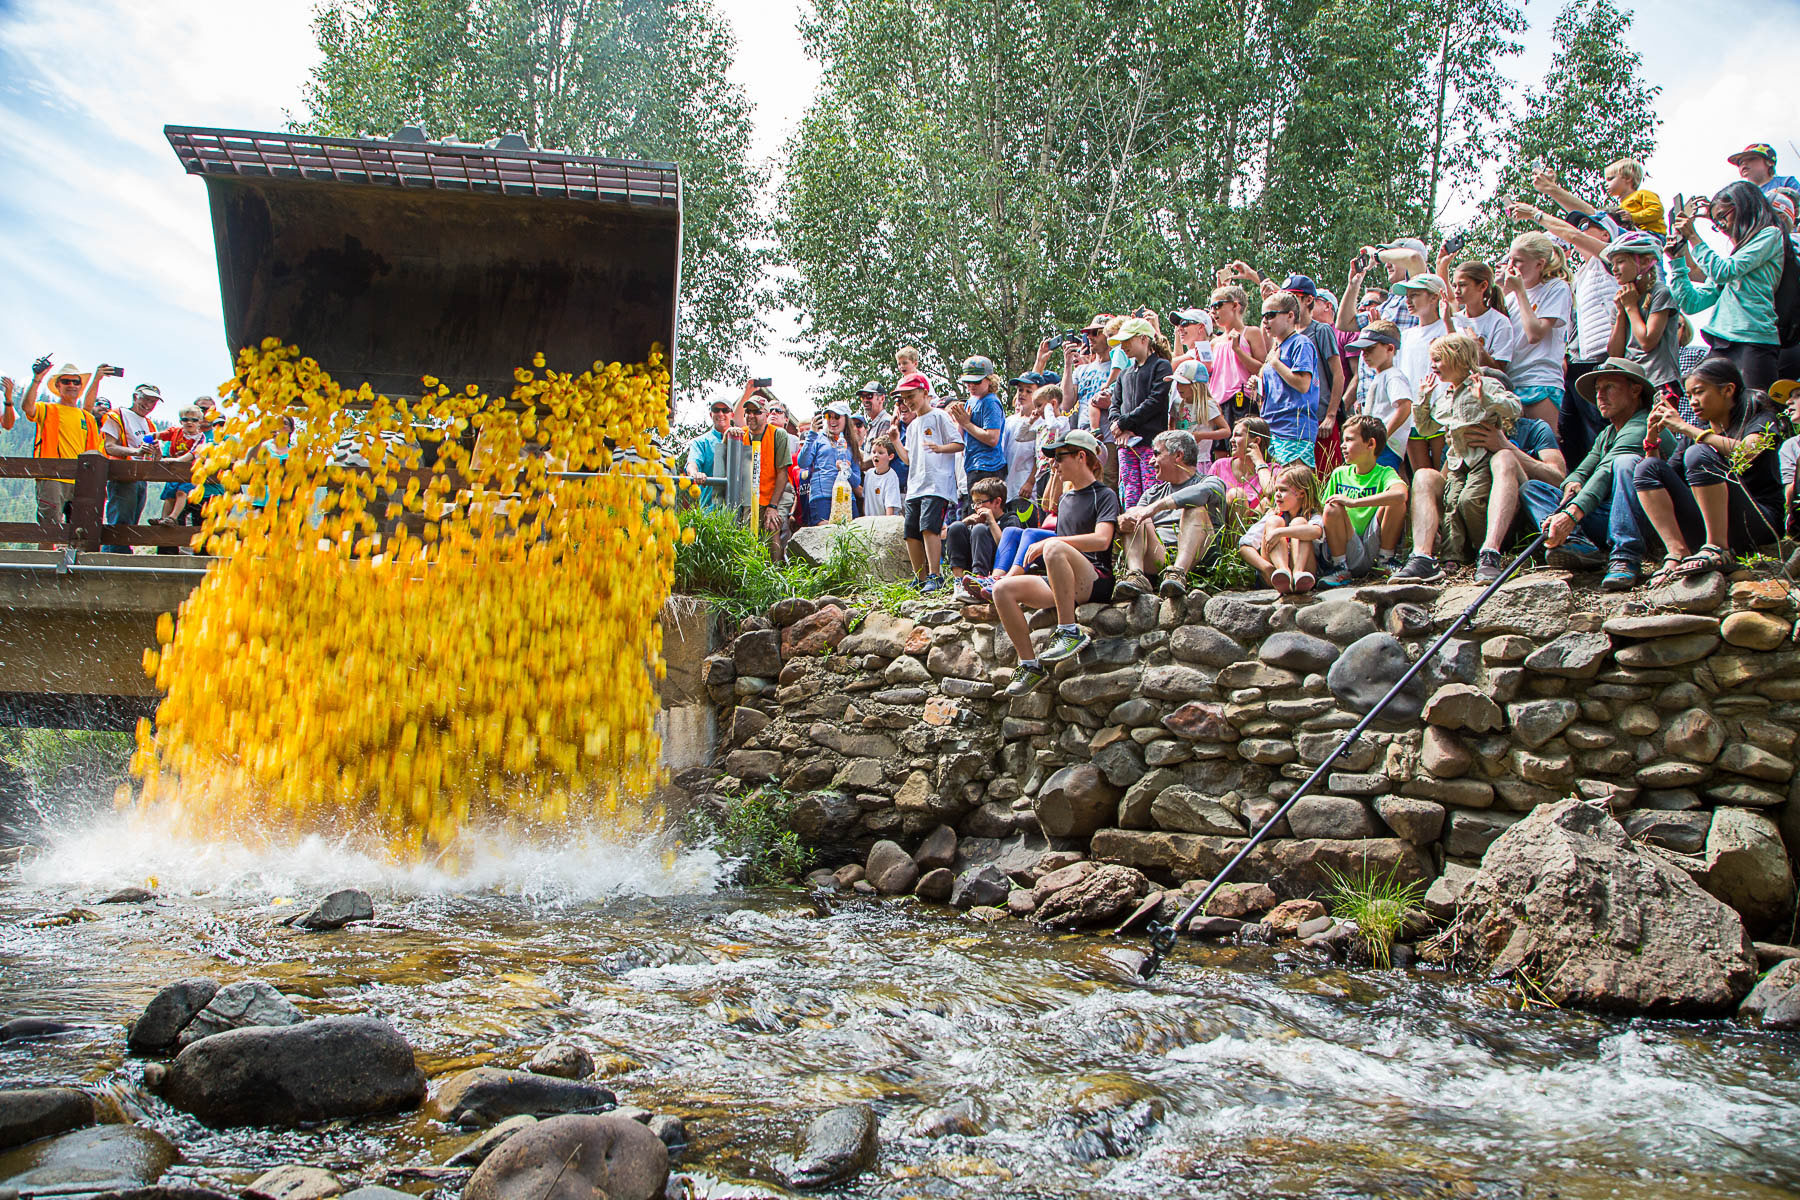 And the race begins at the Crested Butte Rotary Rubber Ducky Race.